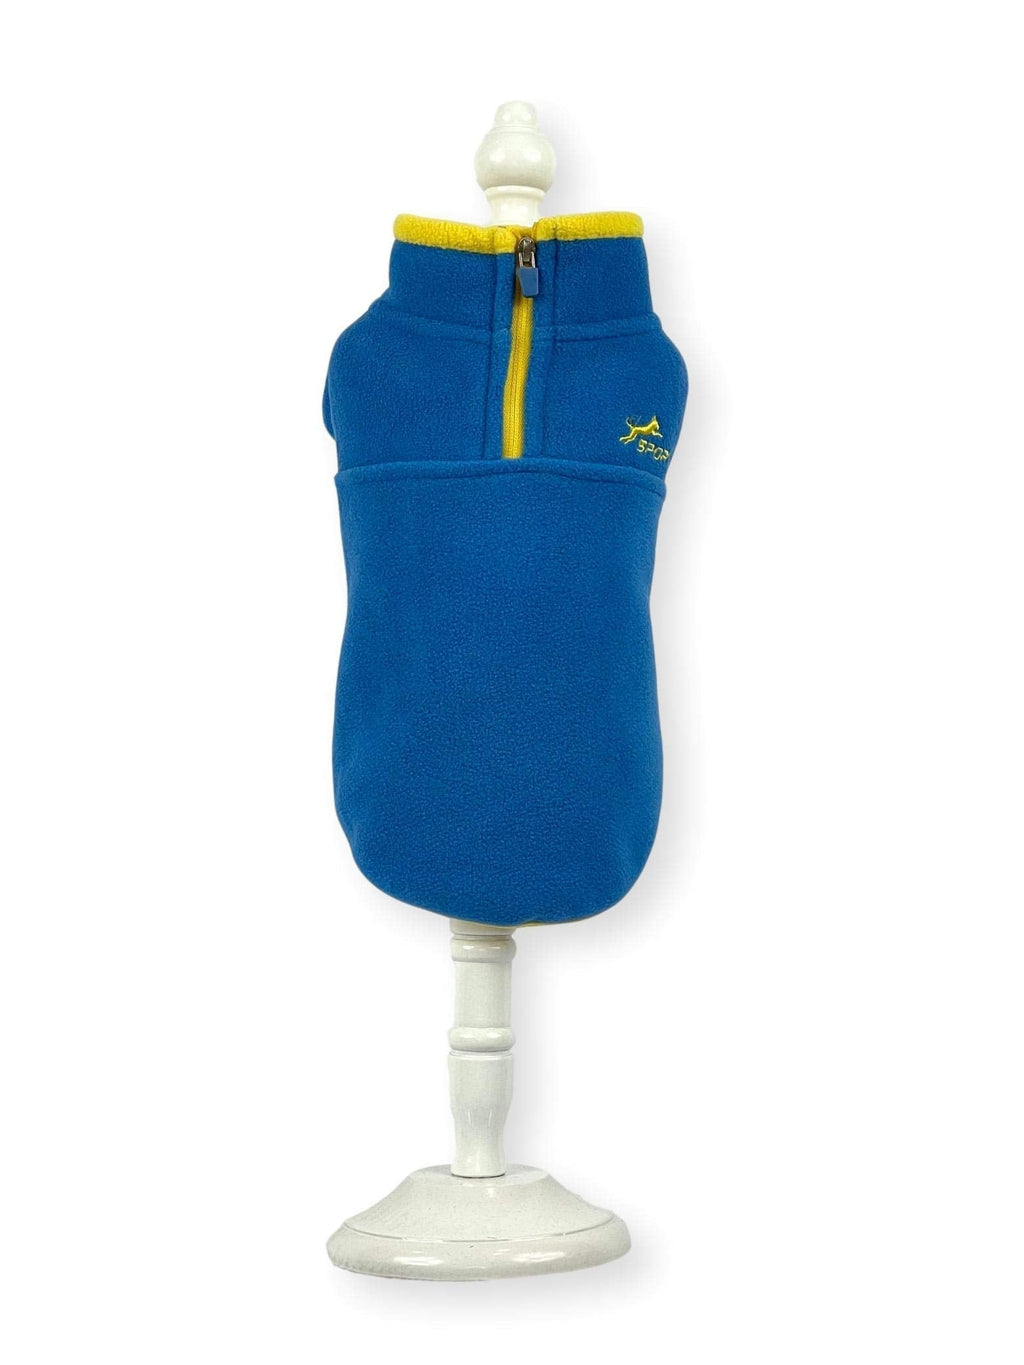 Cara Mia Dogwear Dog Fleece Vest Jumper Sweater Coat for Small Breed Dogs, Extra Thick, (Small, Blue and Yellow) - PawsPlanet Australia